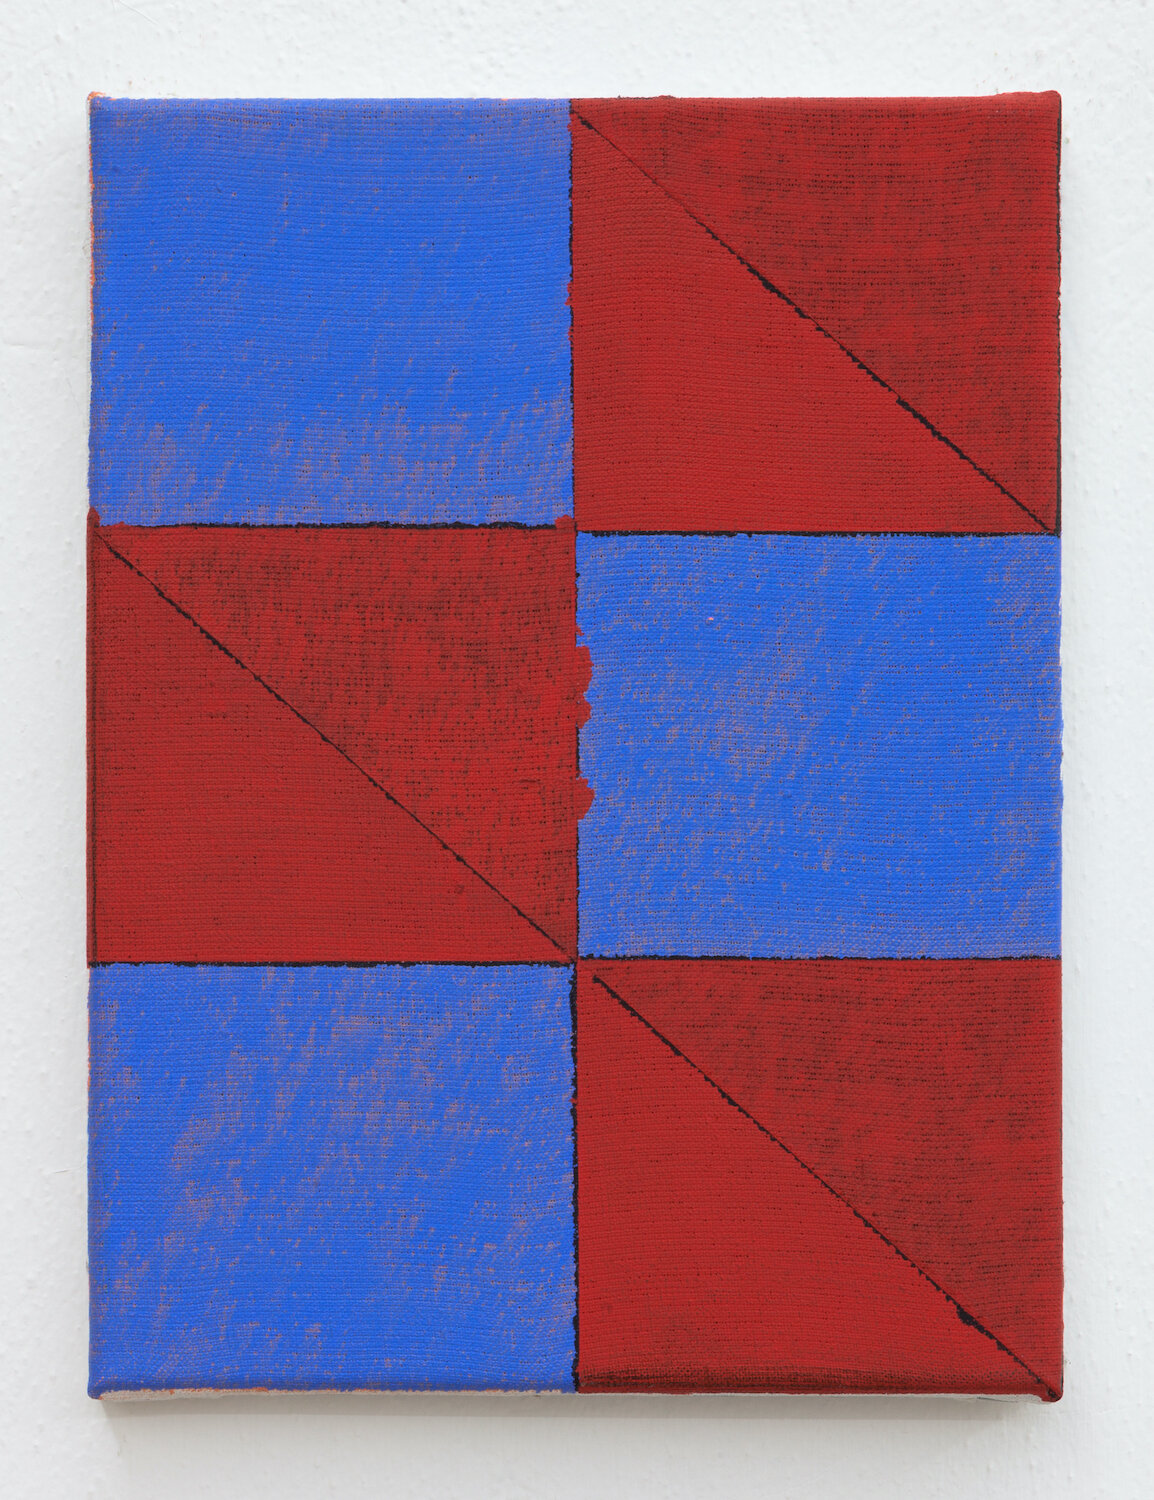  Joshua Abelow,  Untitled (Abstraction “HX”) , 2019, Oil on linen, 12 x 9 inches 